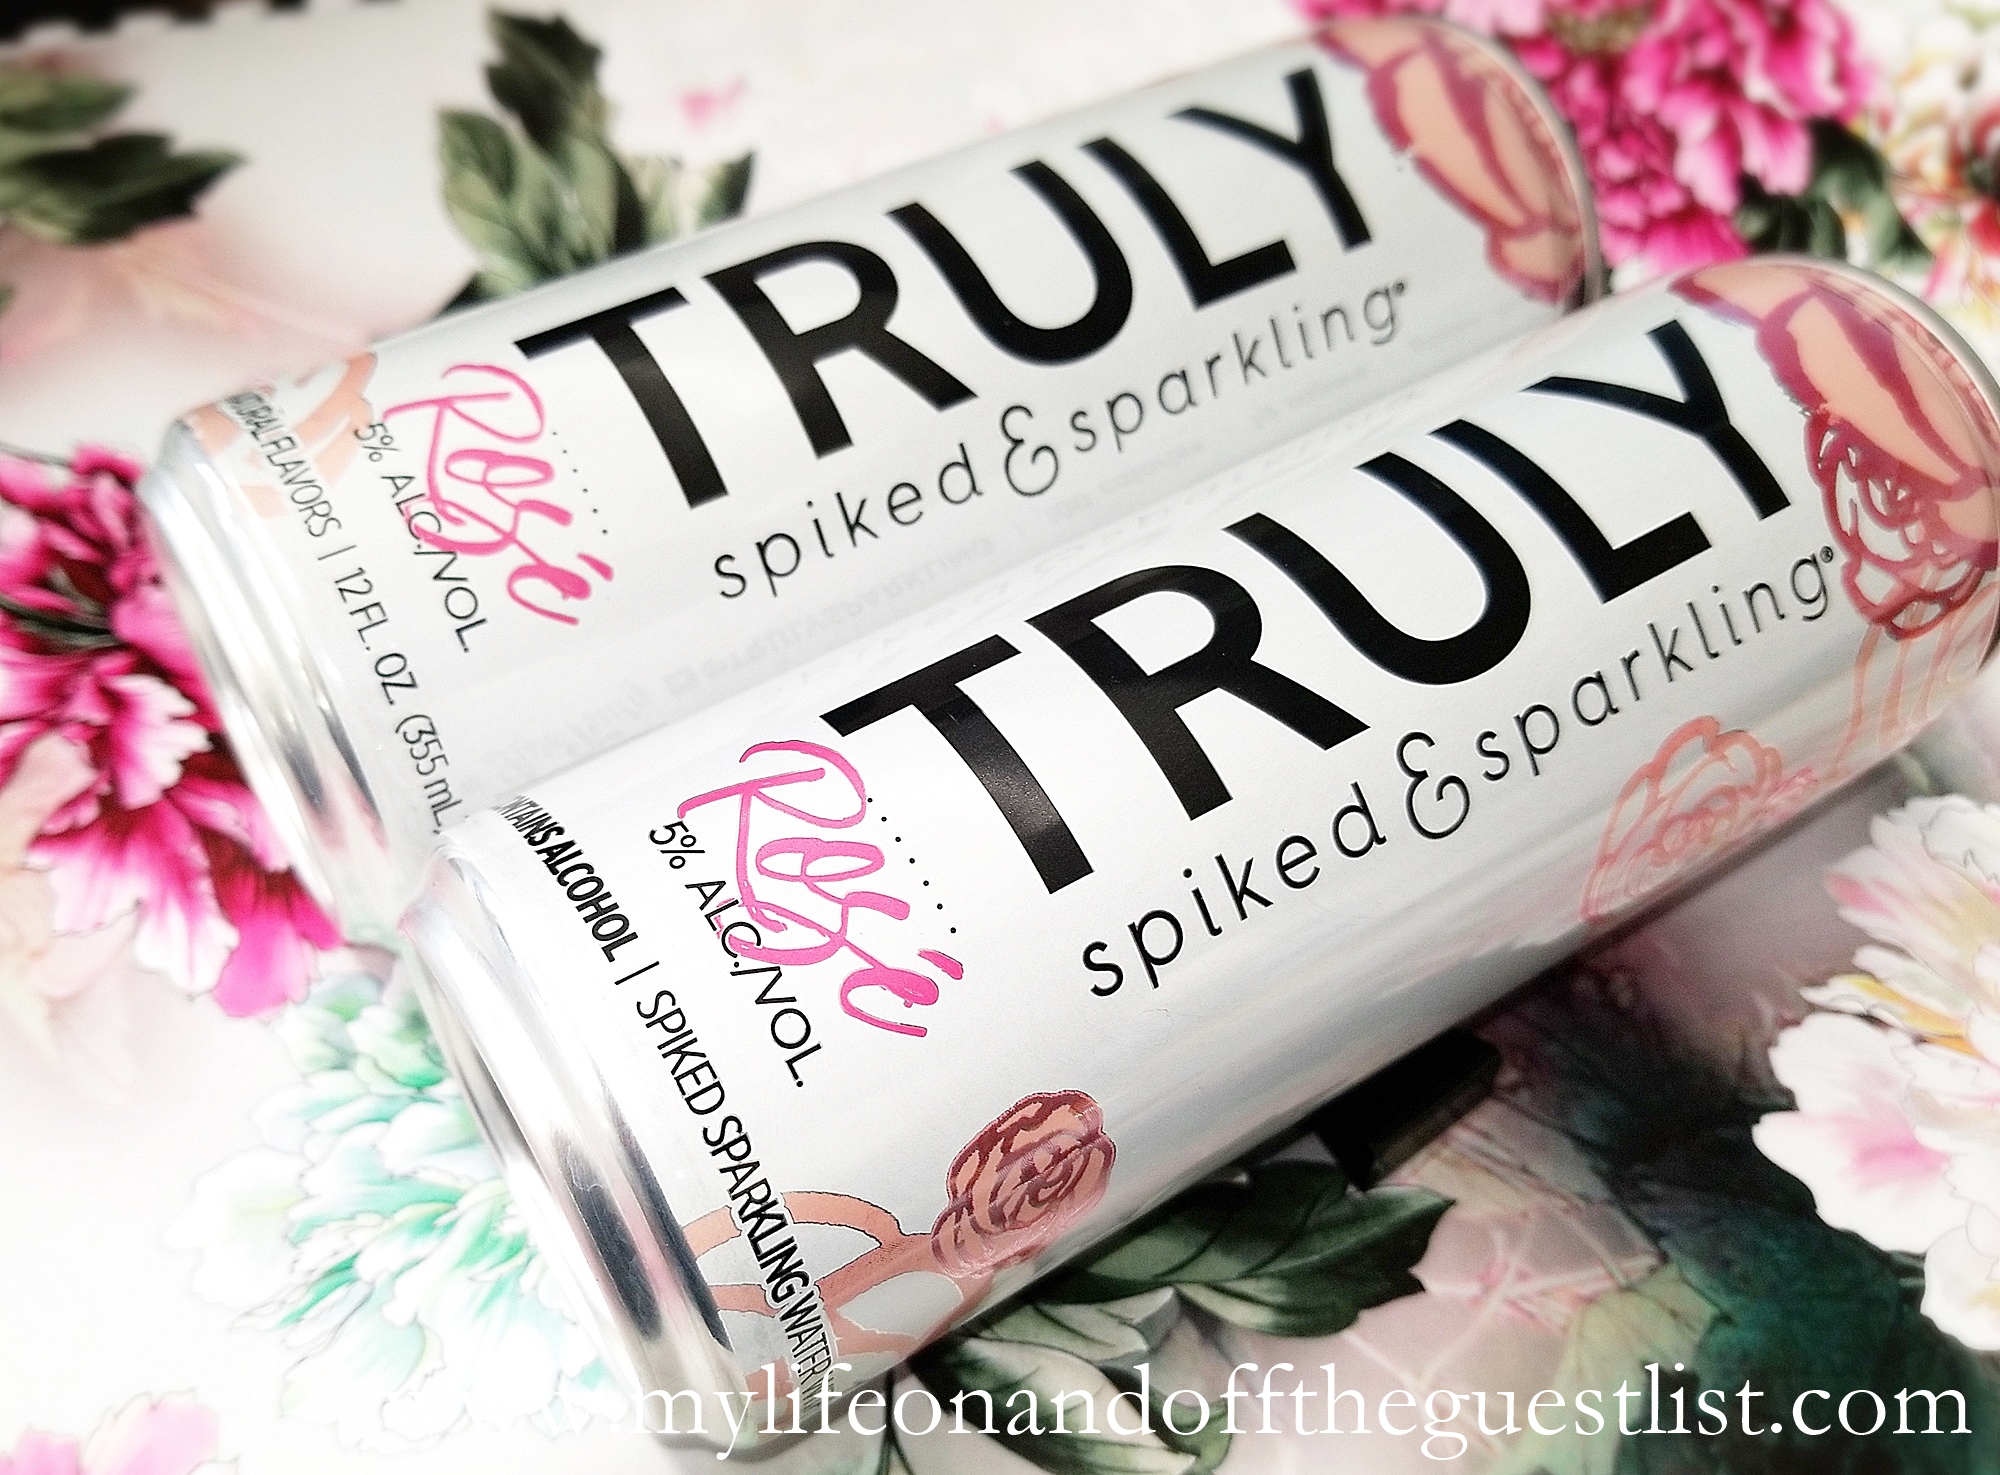 Truly Spiked and Sparkling Rosé Water